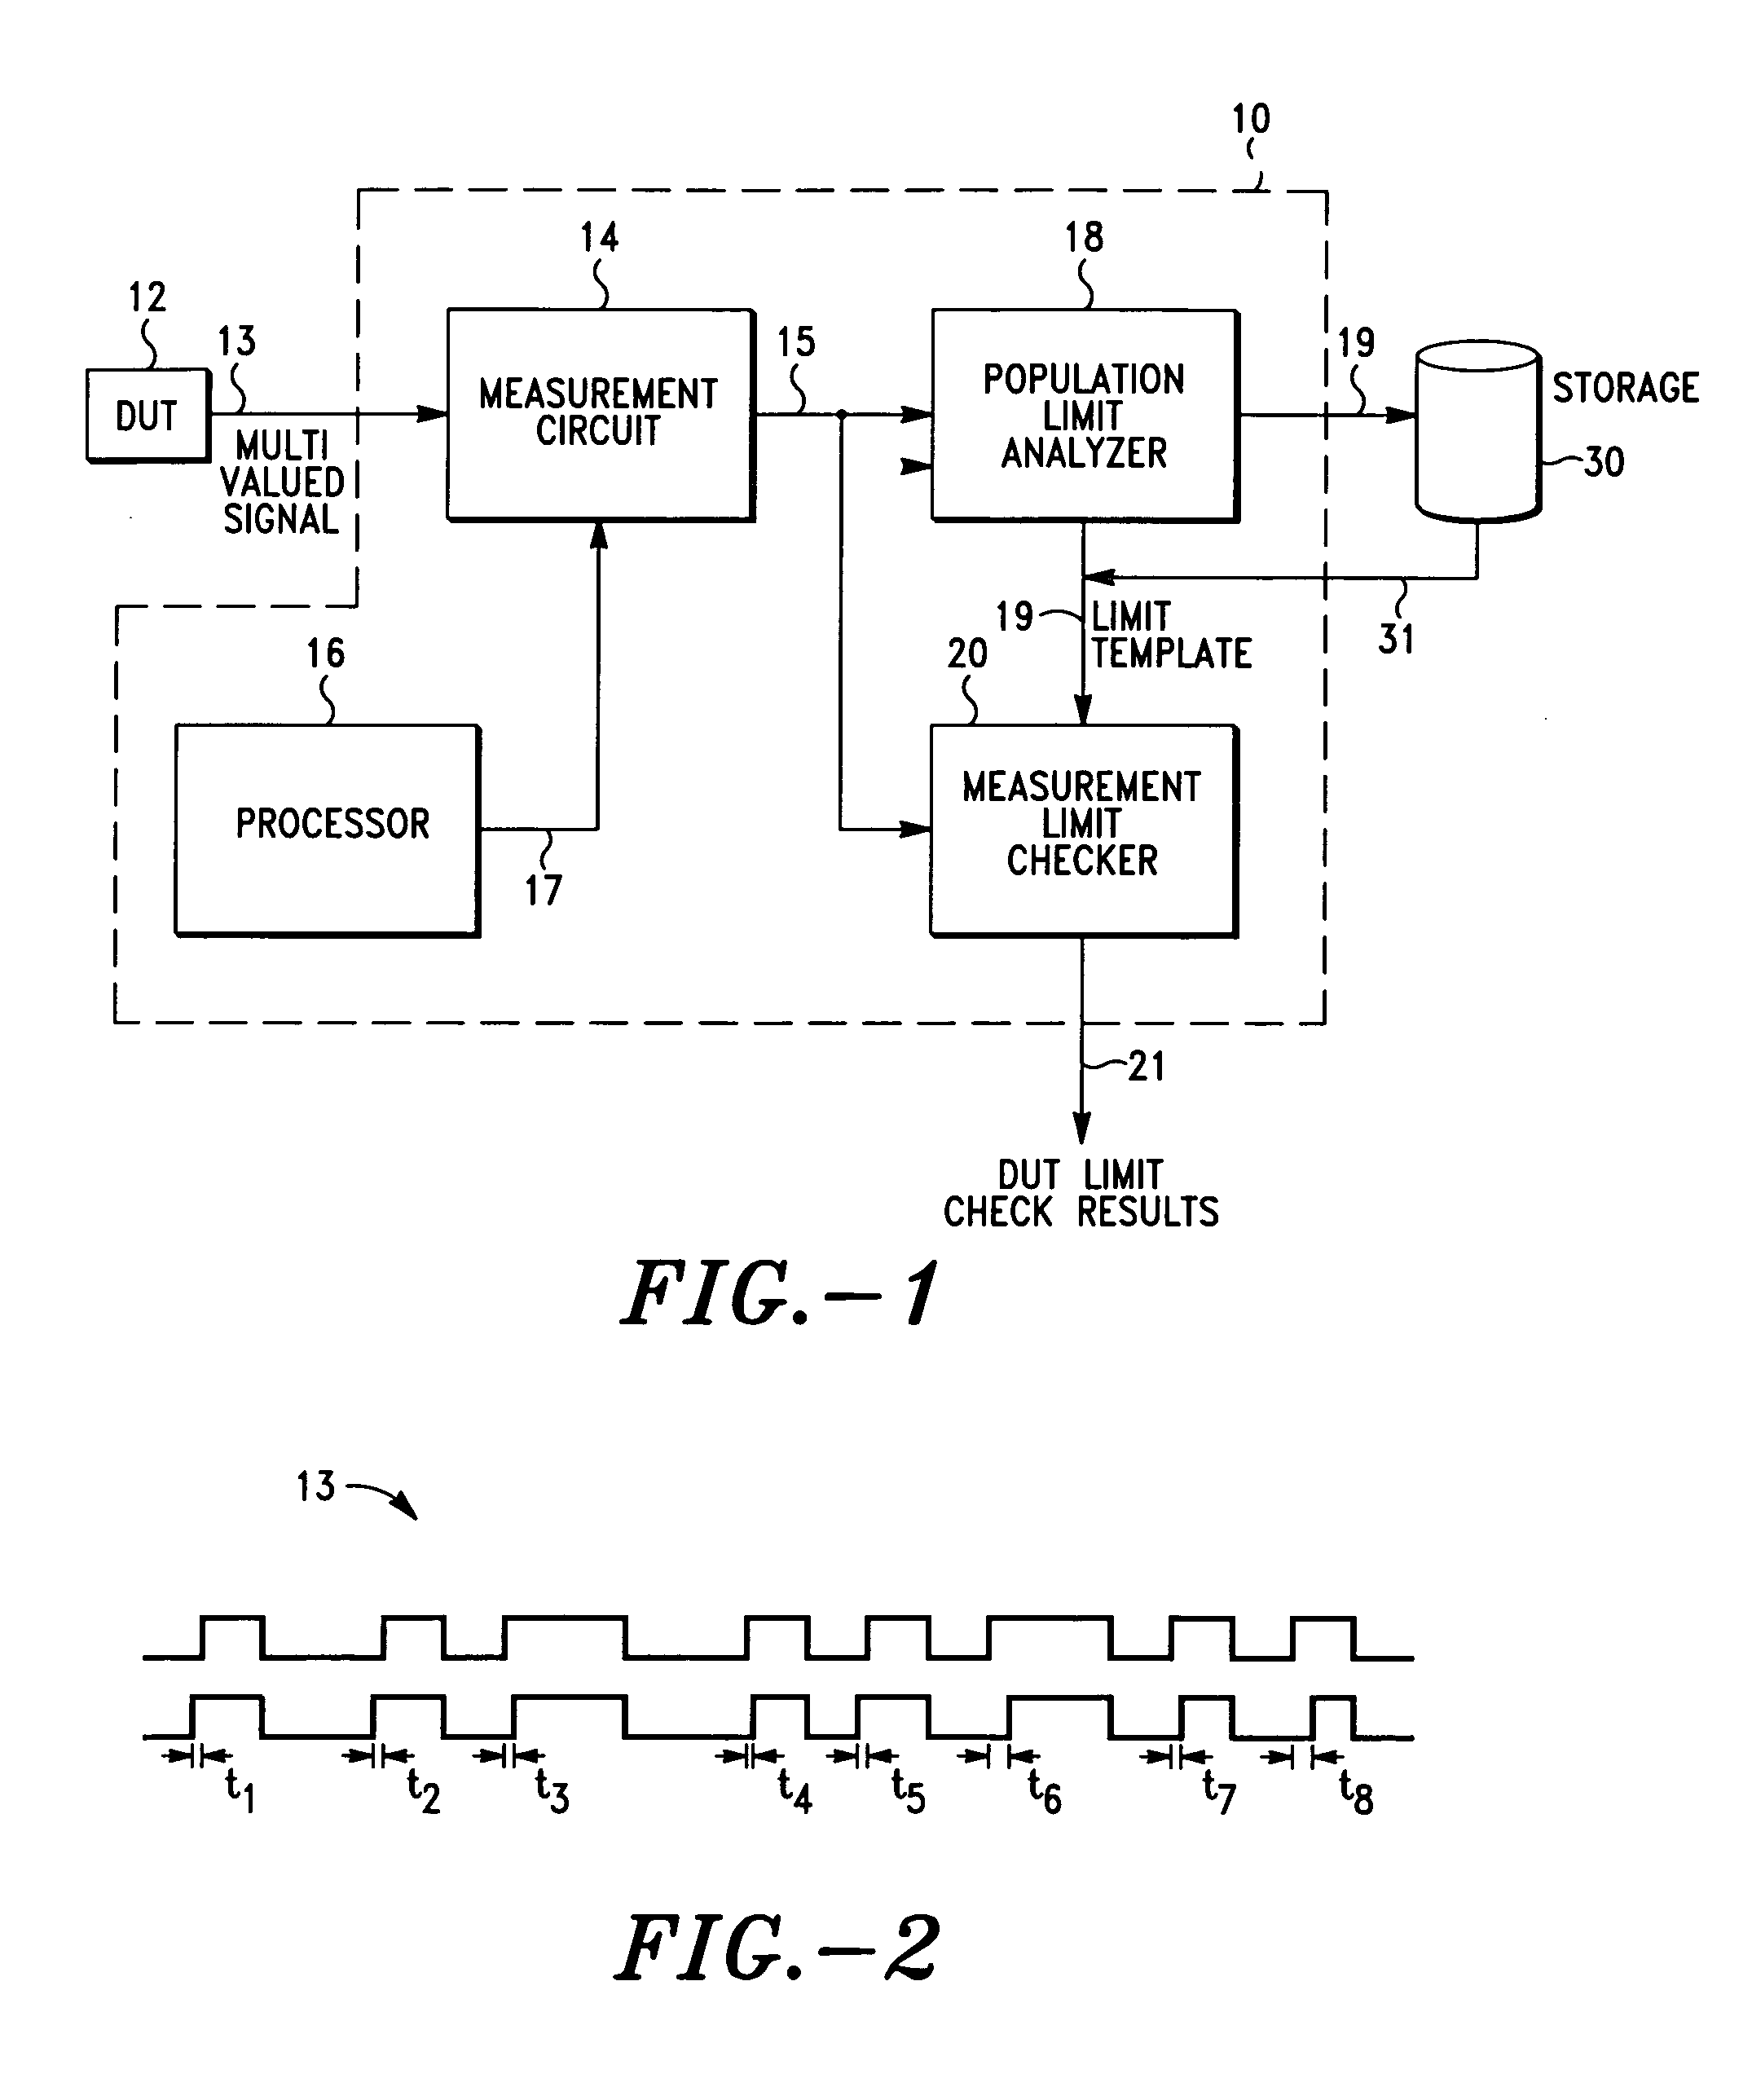 Method and apparatus for creating performance limits from parametric measurements